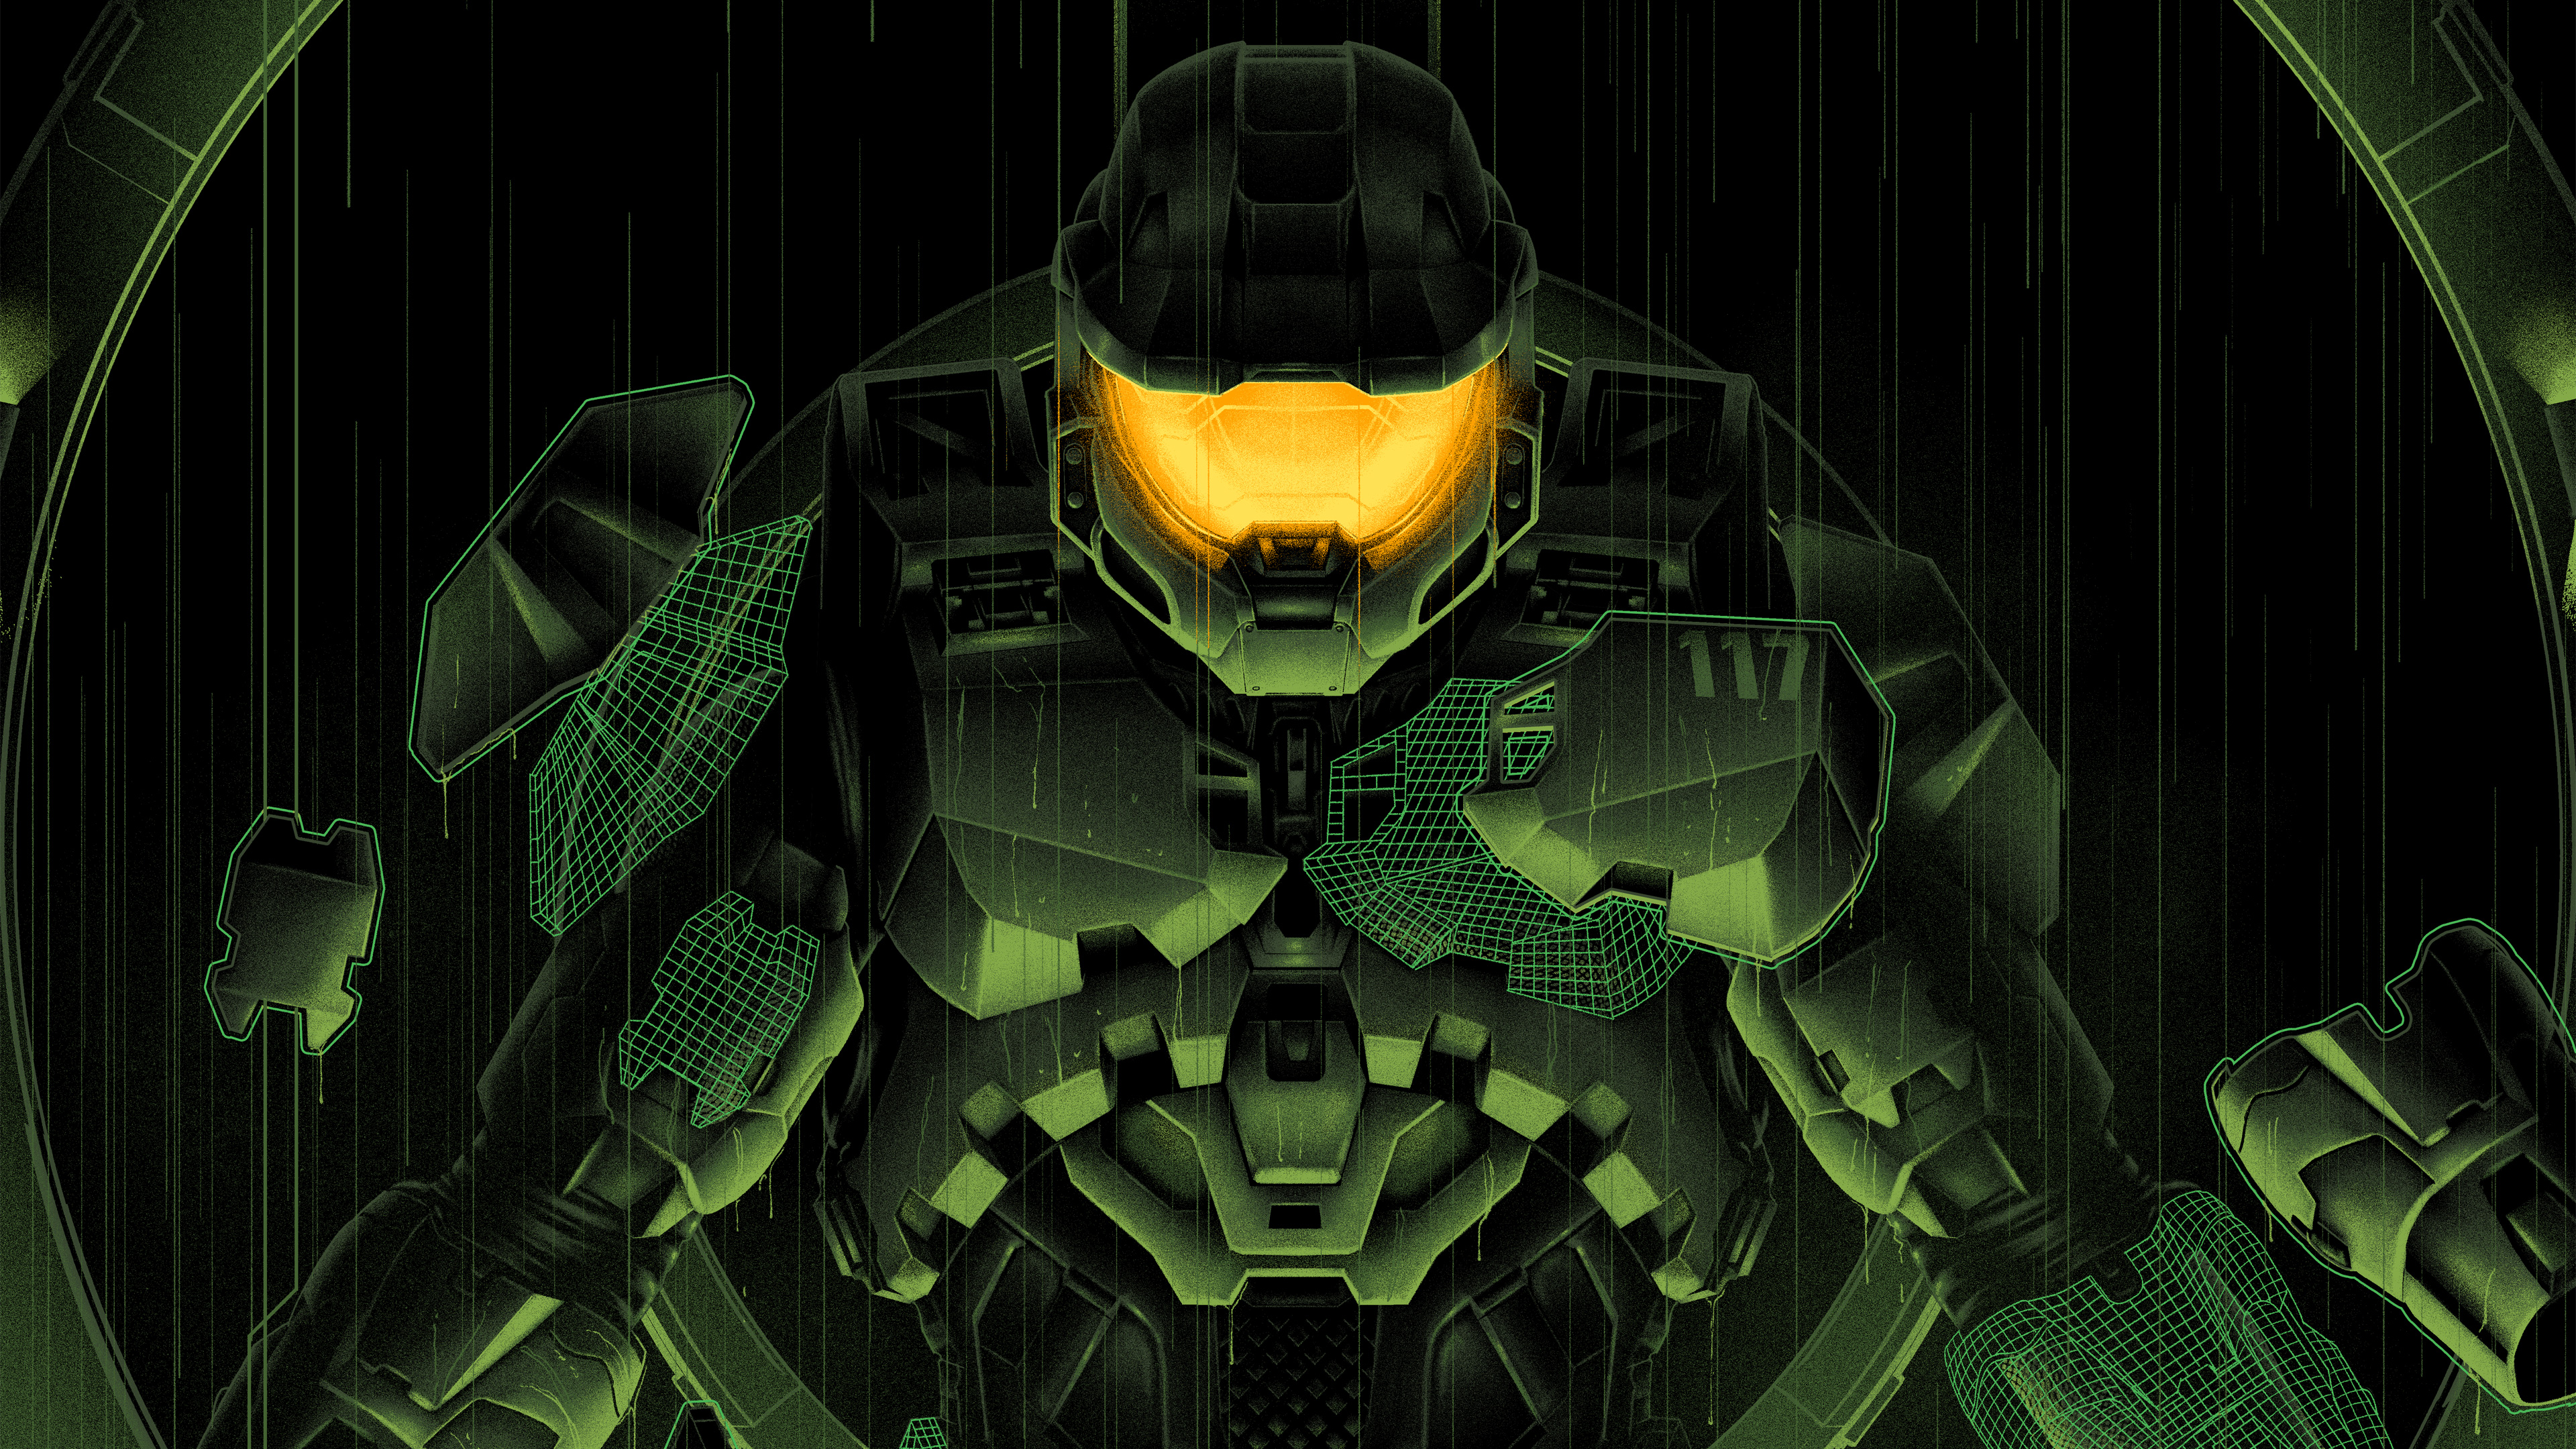 Halo 3 phone wallpaper 1080P 2k 4k Full HD Wallpapers Backgrounds Free  Download  Wallpaper Crafter